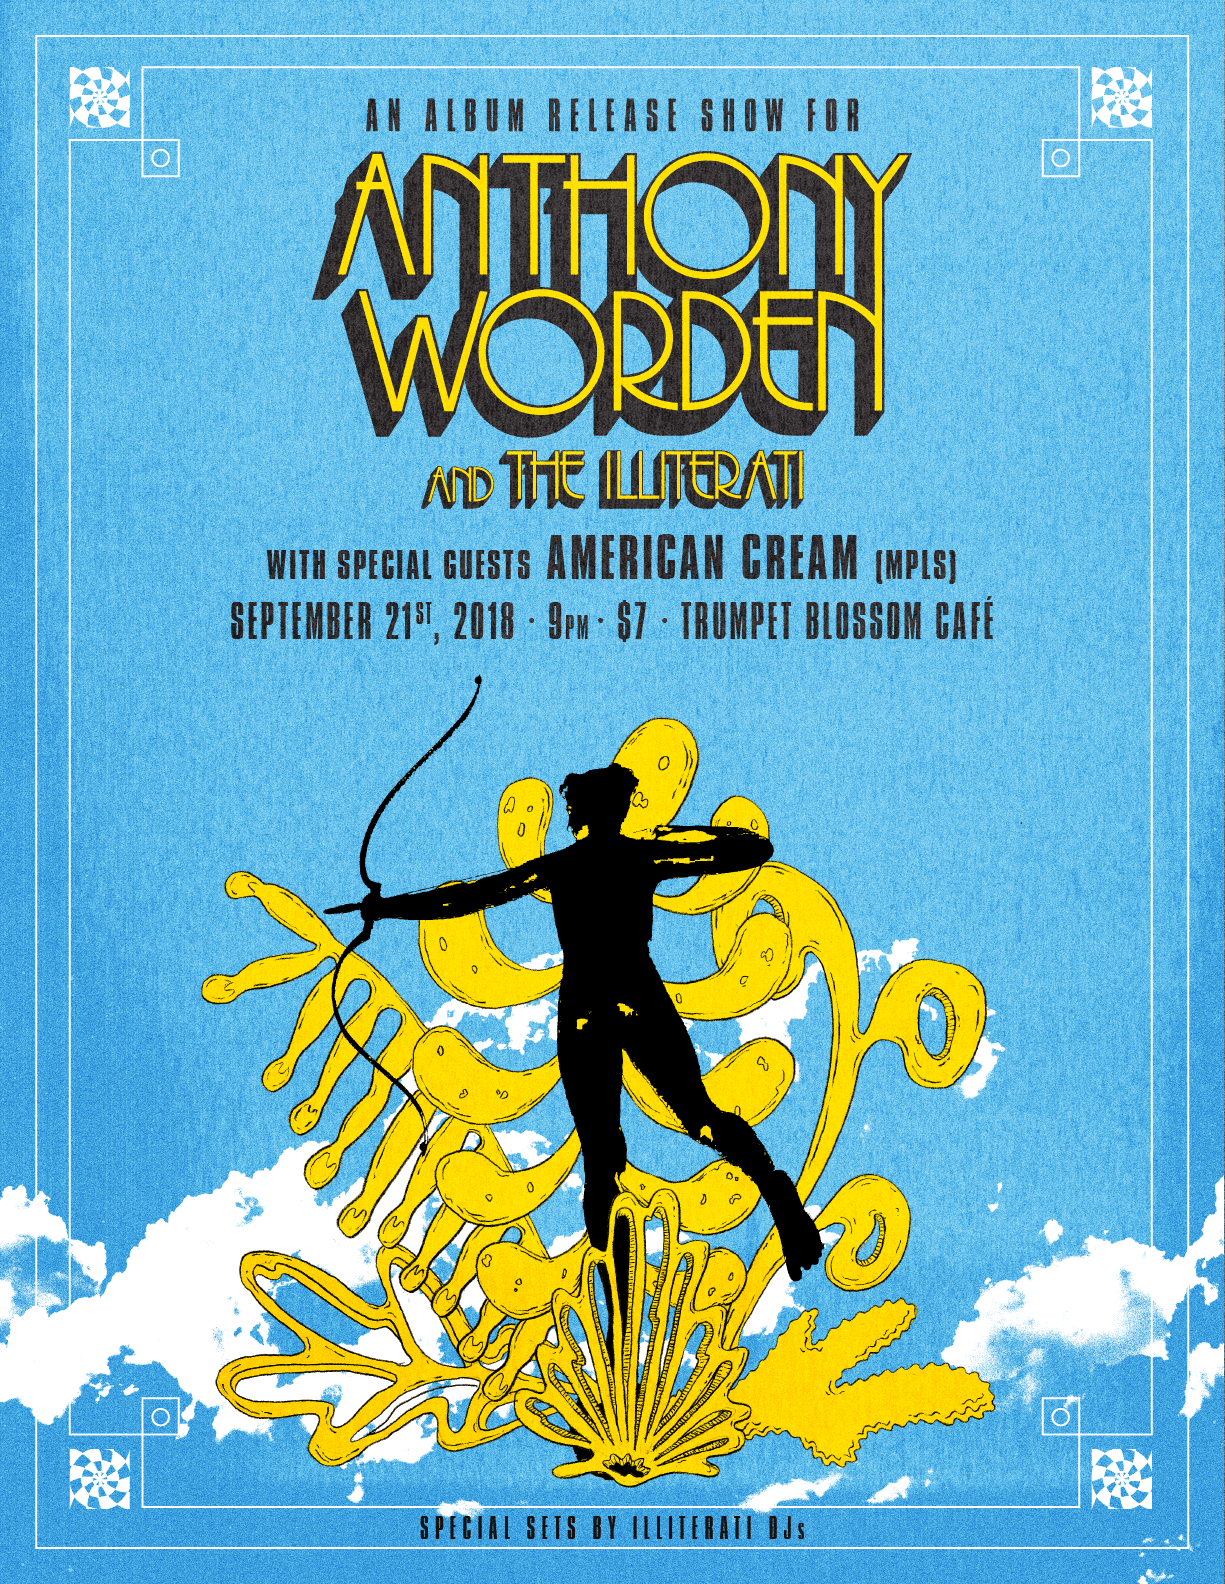 20180731_Anthony-Worden_Release-Poster_1.png